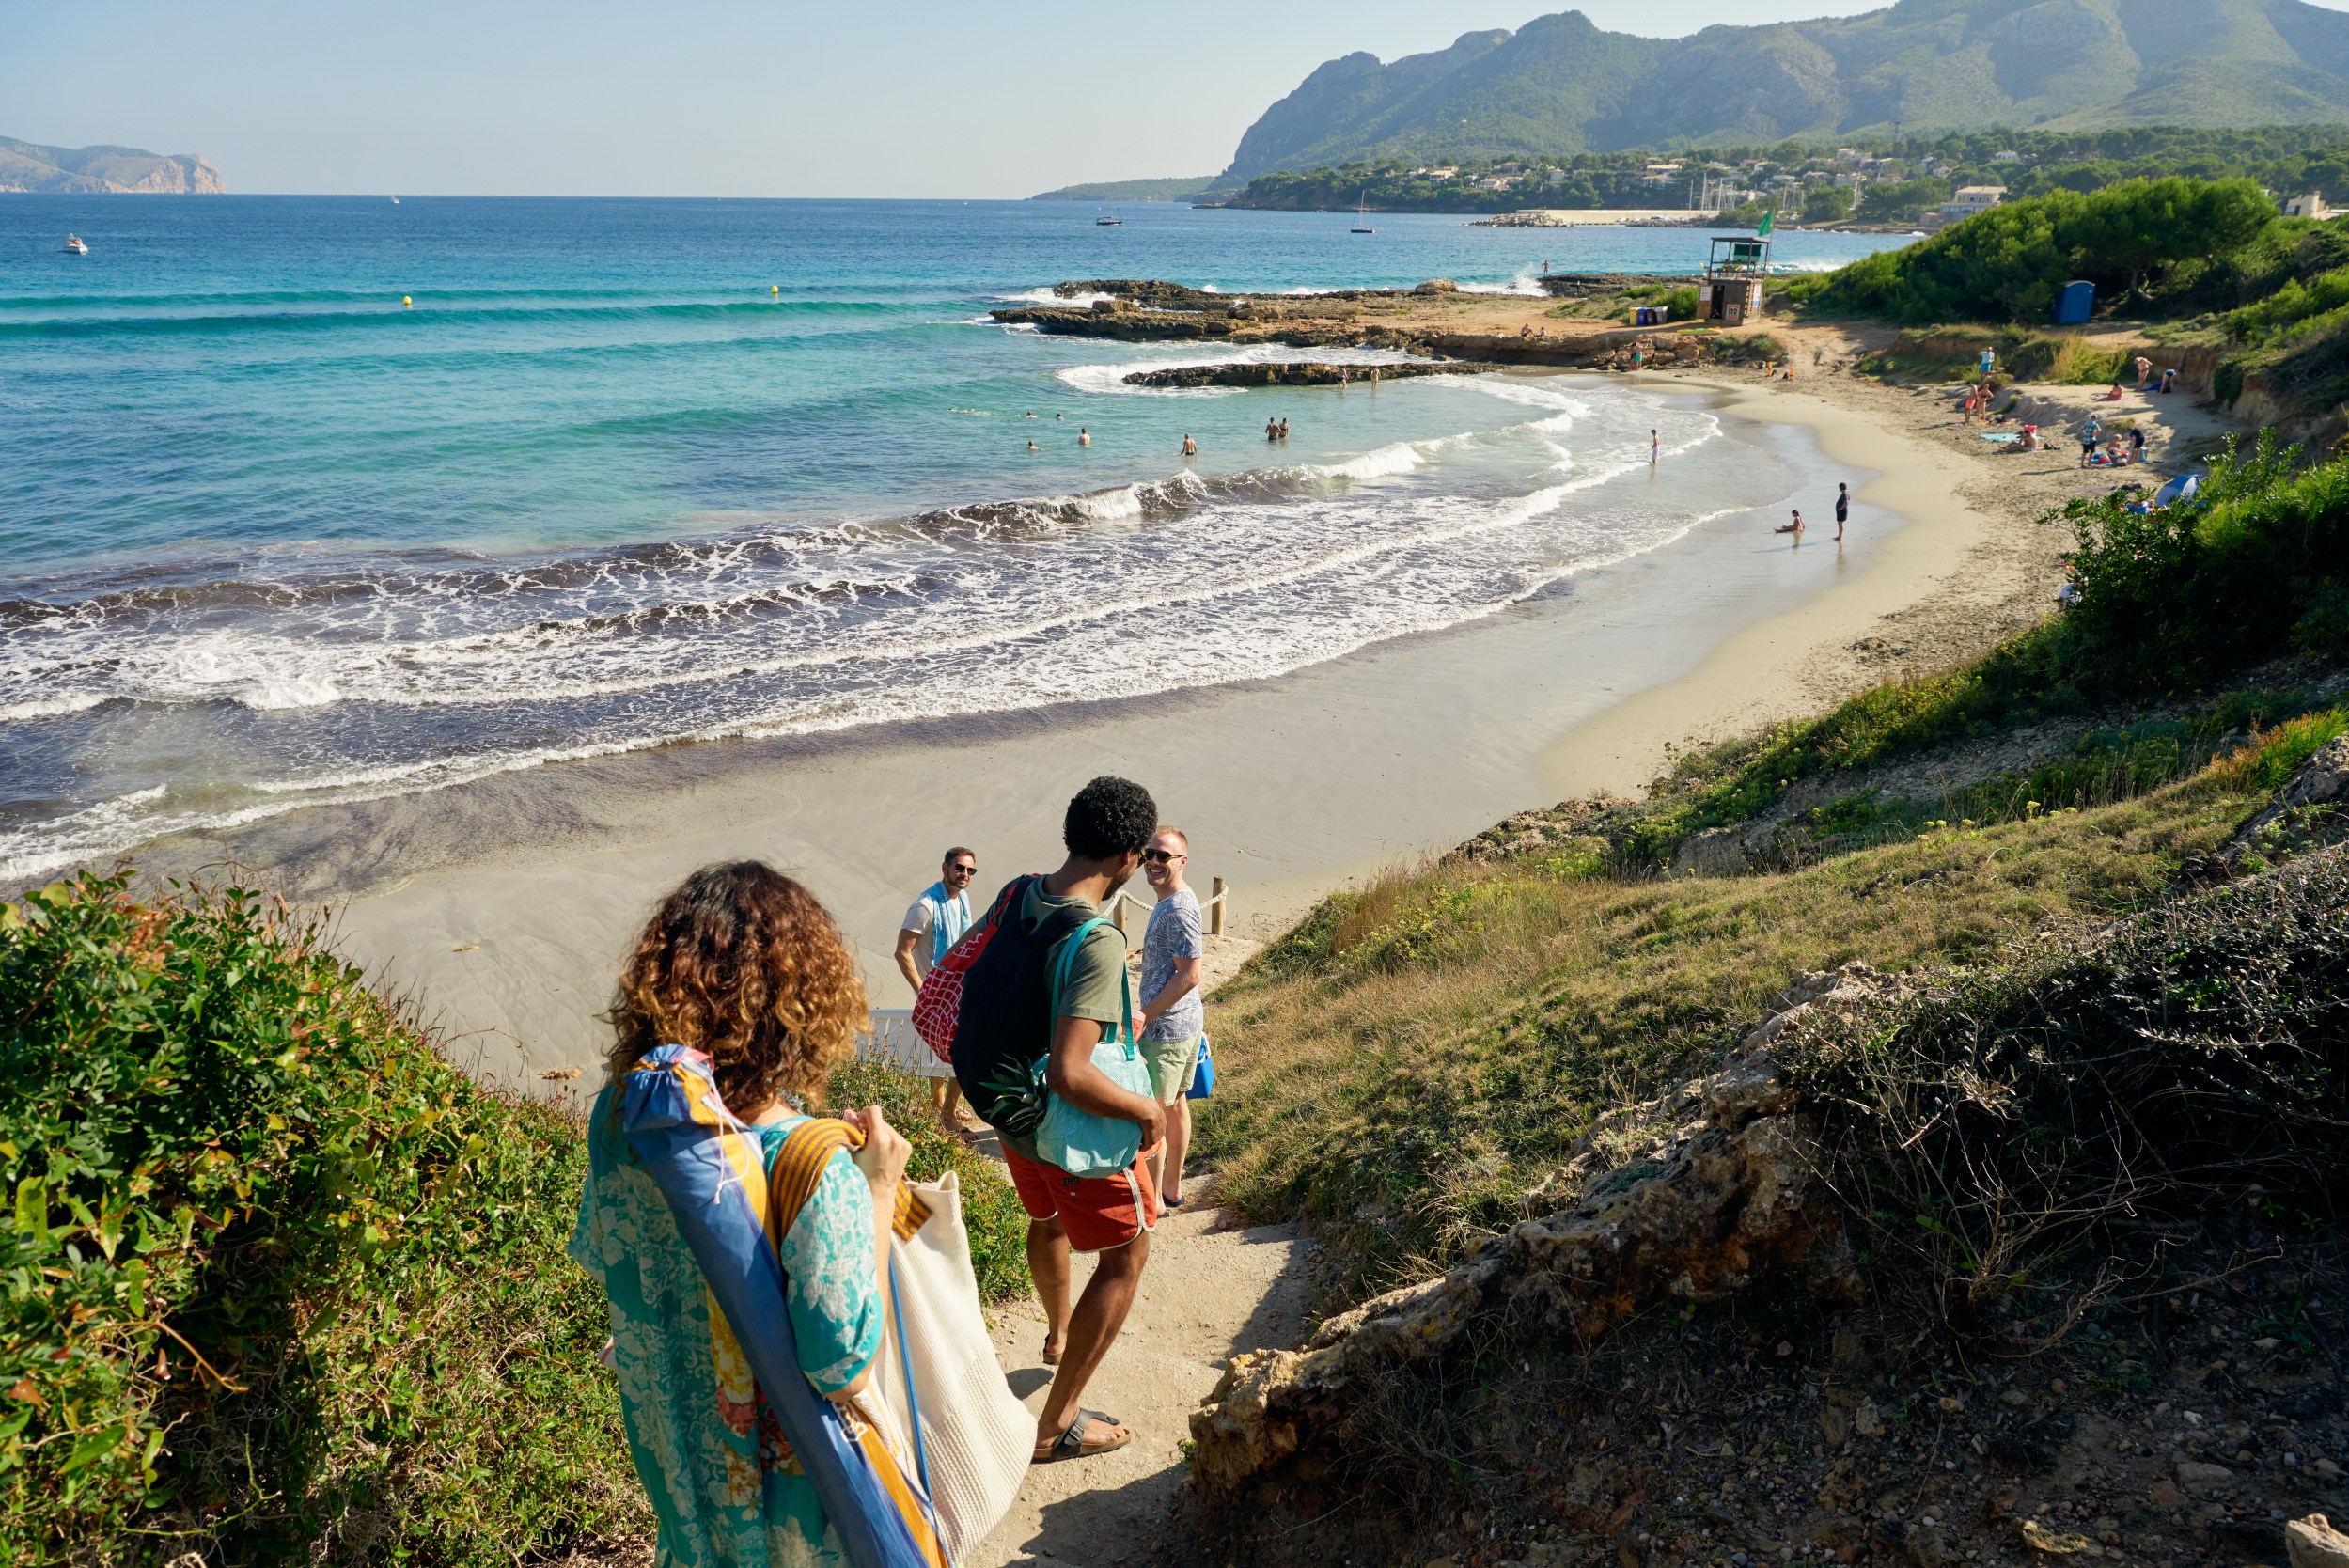 Group of travelers walking down a sandy path to an untouched beach.